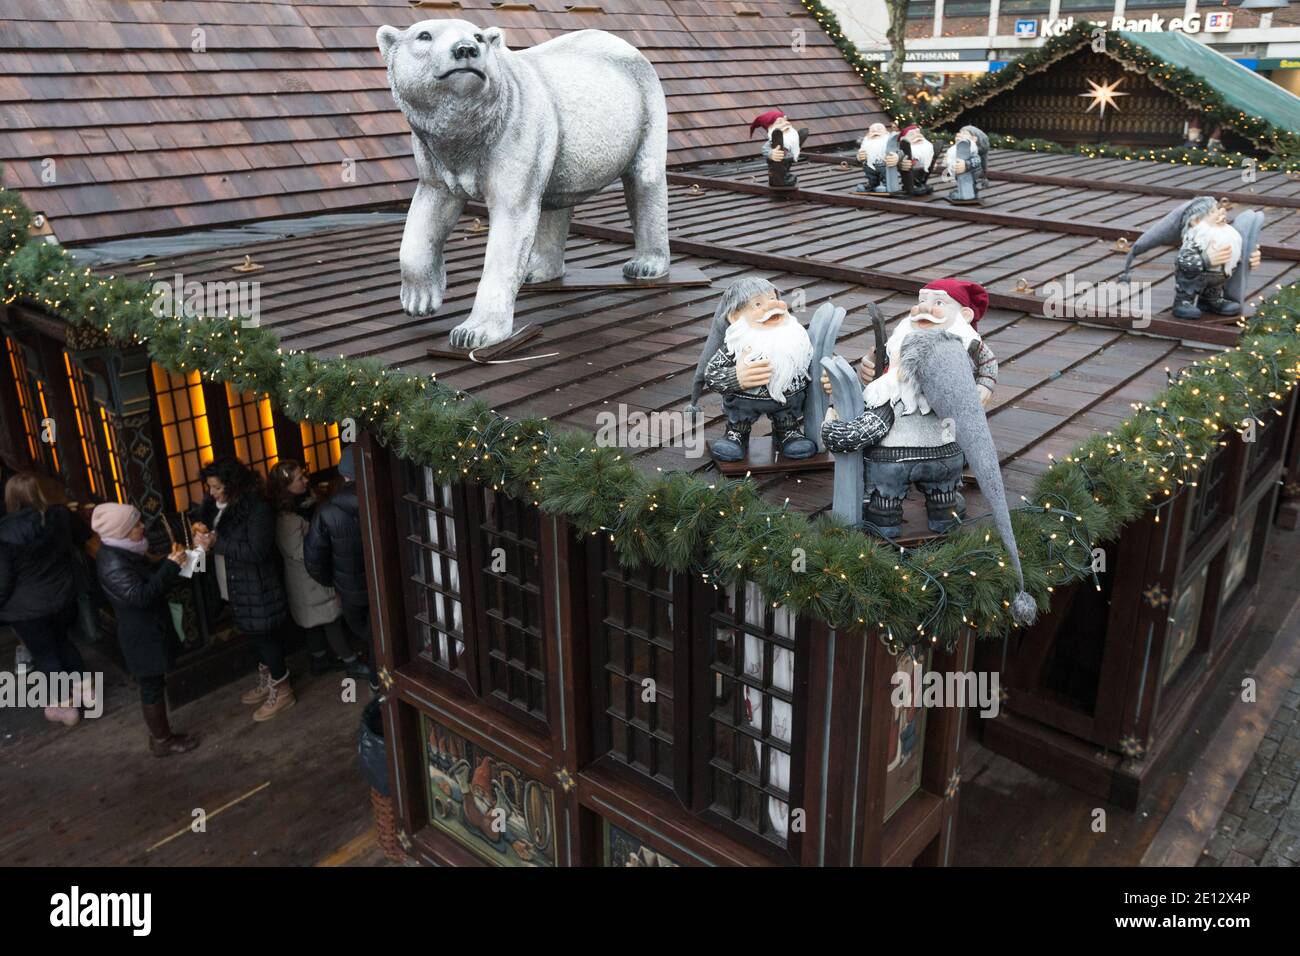 A polar bear and gnomes watch over people drinking gluhwein or mulled wine the Christmas Market, or Weihnachtsmarkt in the historic Altstadt, or in th Stock Photo